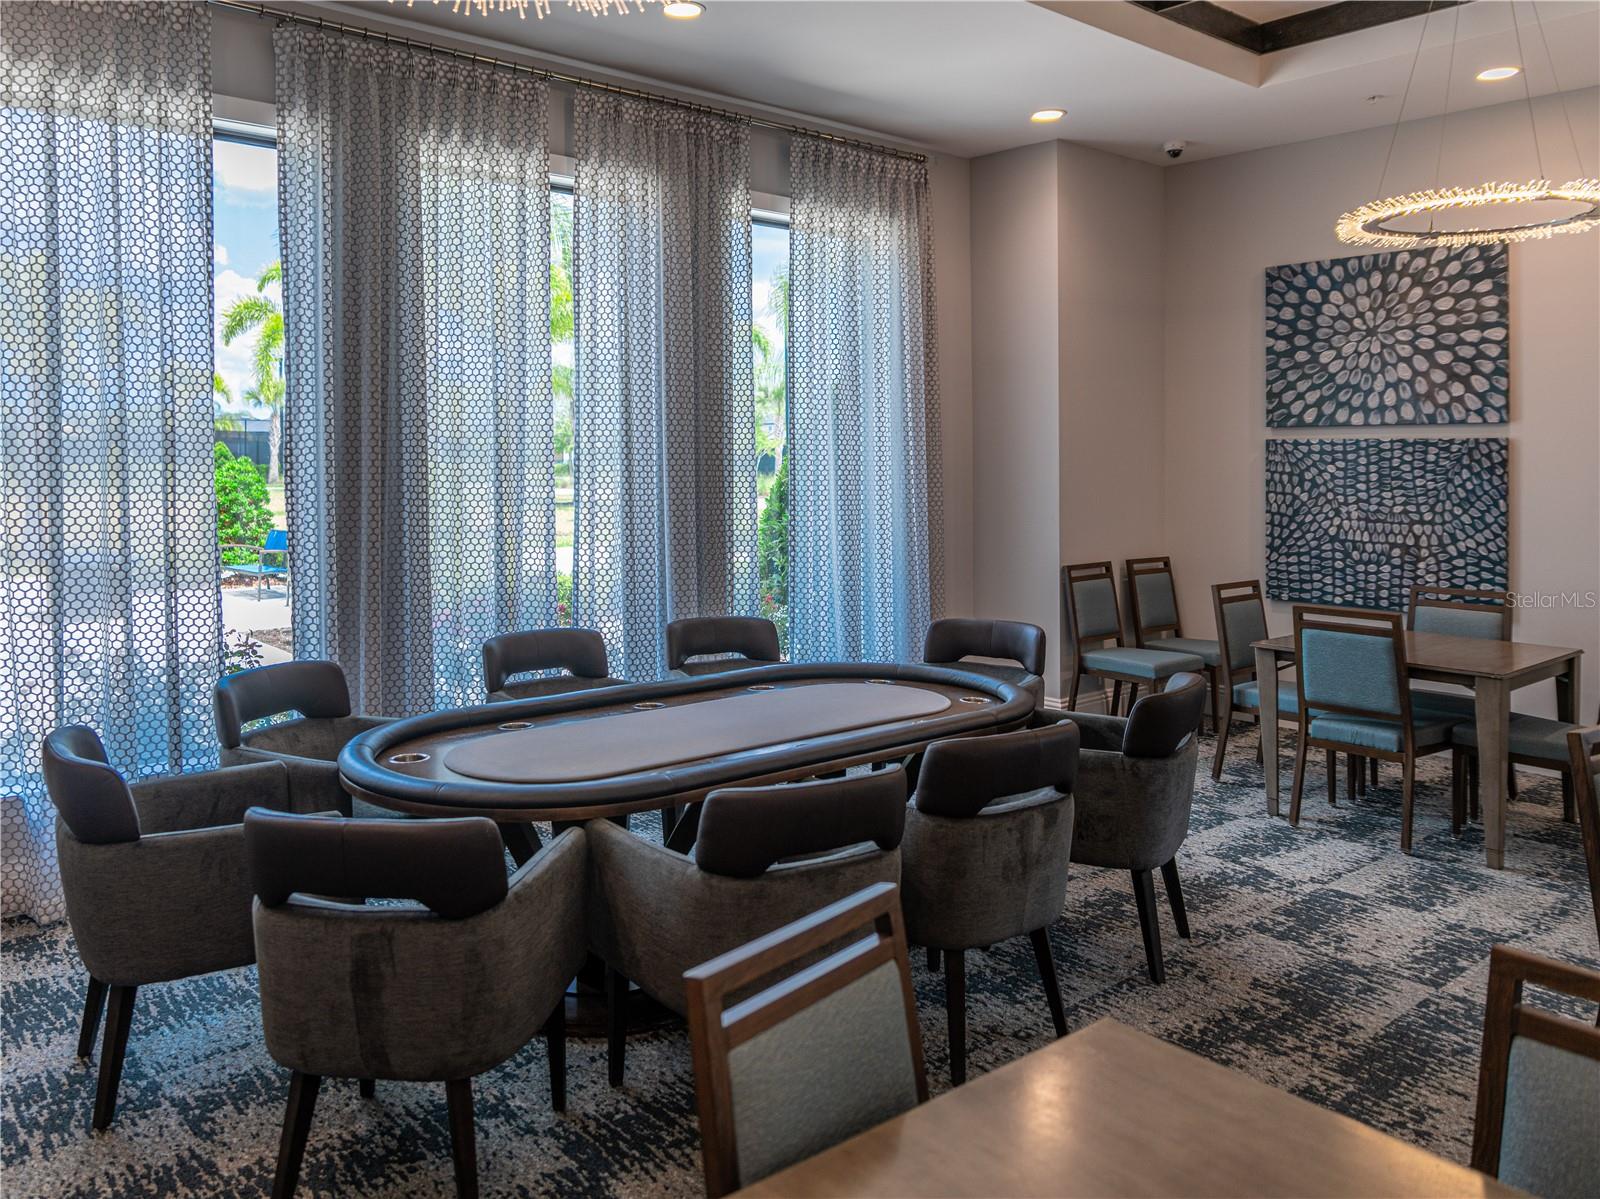 Card Room and Social Gathering Room